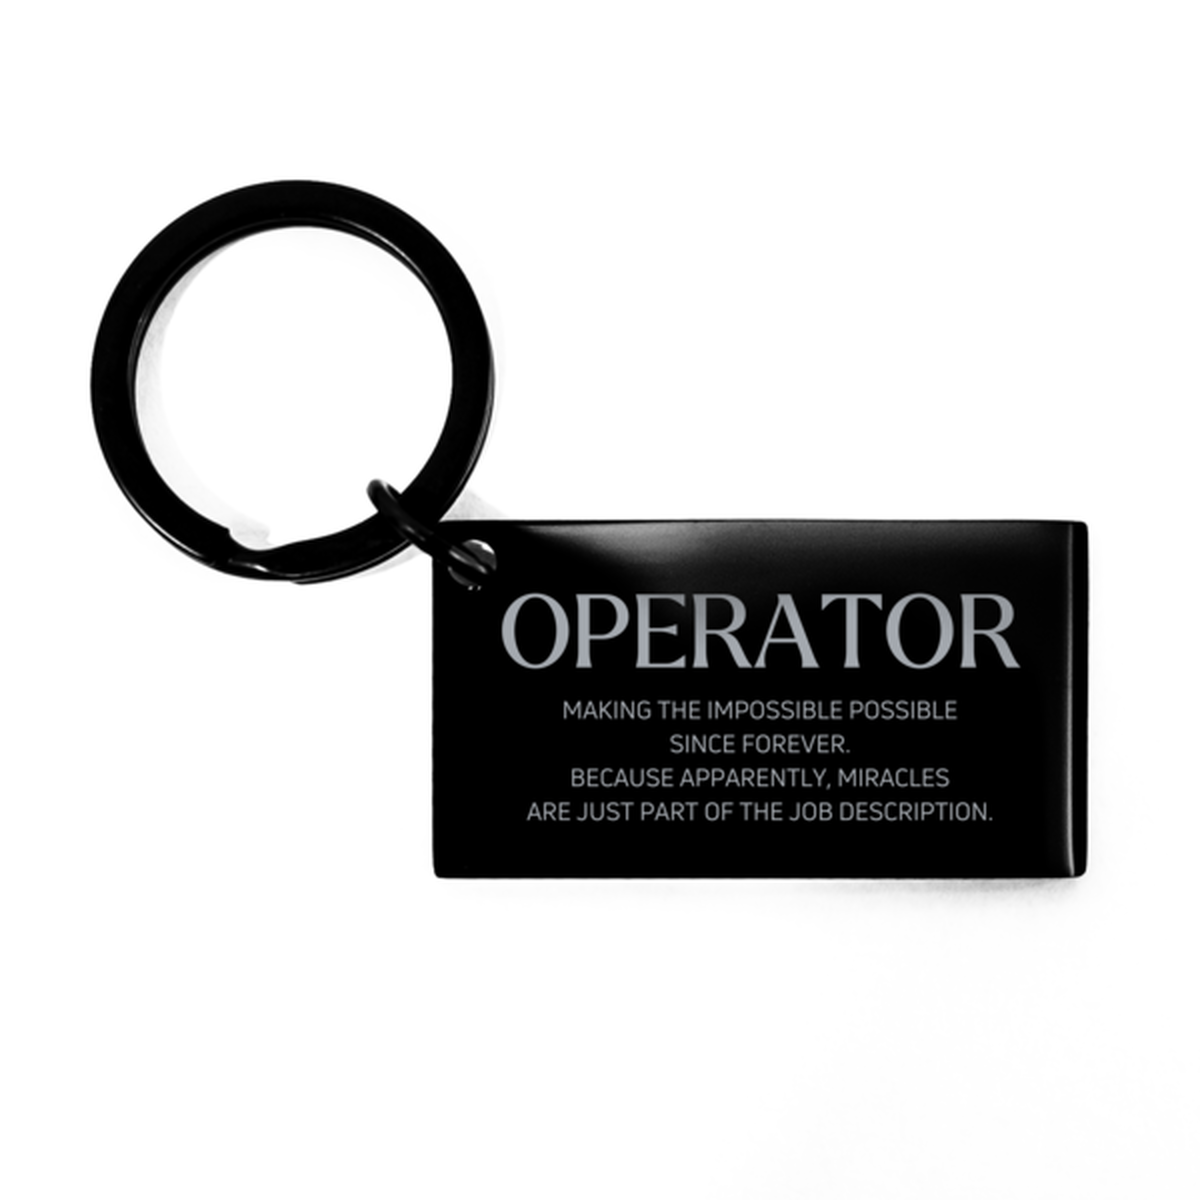 Funny Operator Gifts, Miracles are just part of the job description, Inspirational Birthday Keychain For Operator, Men, Women, Coworkers, Friends, Boss